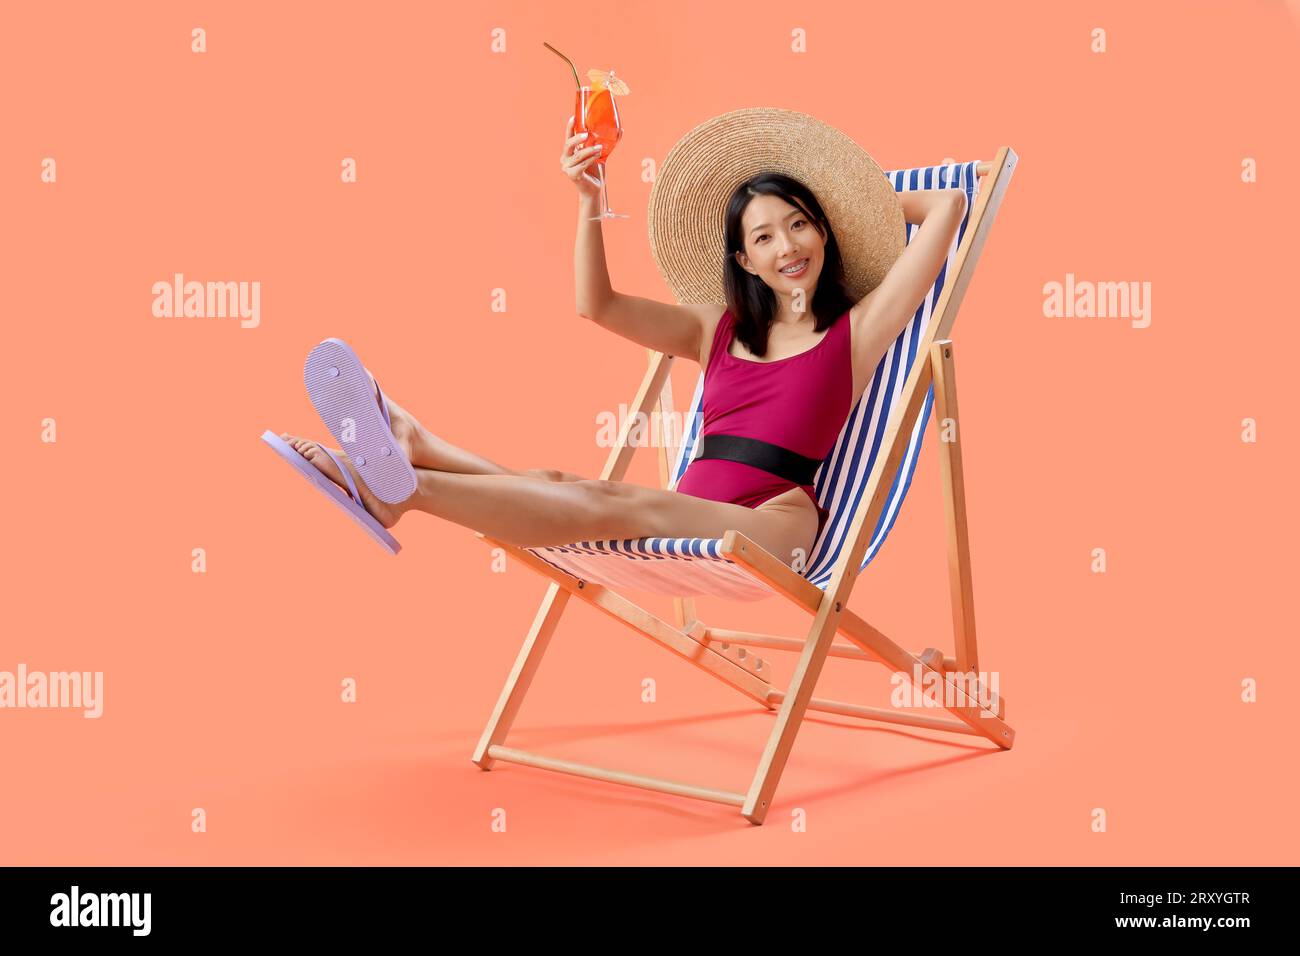 Beautiful young Asian woman in swimsuit with tasty aperol spritz sitting on deckchair against orange background Stock Photo